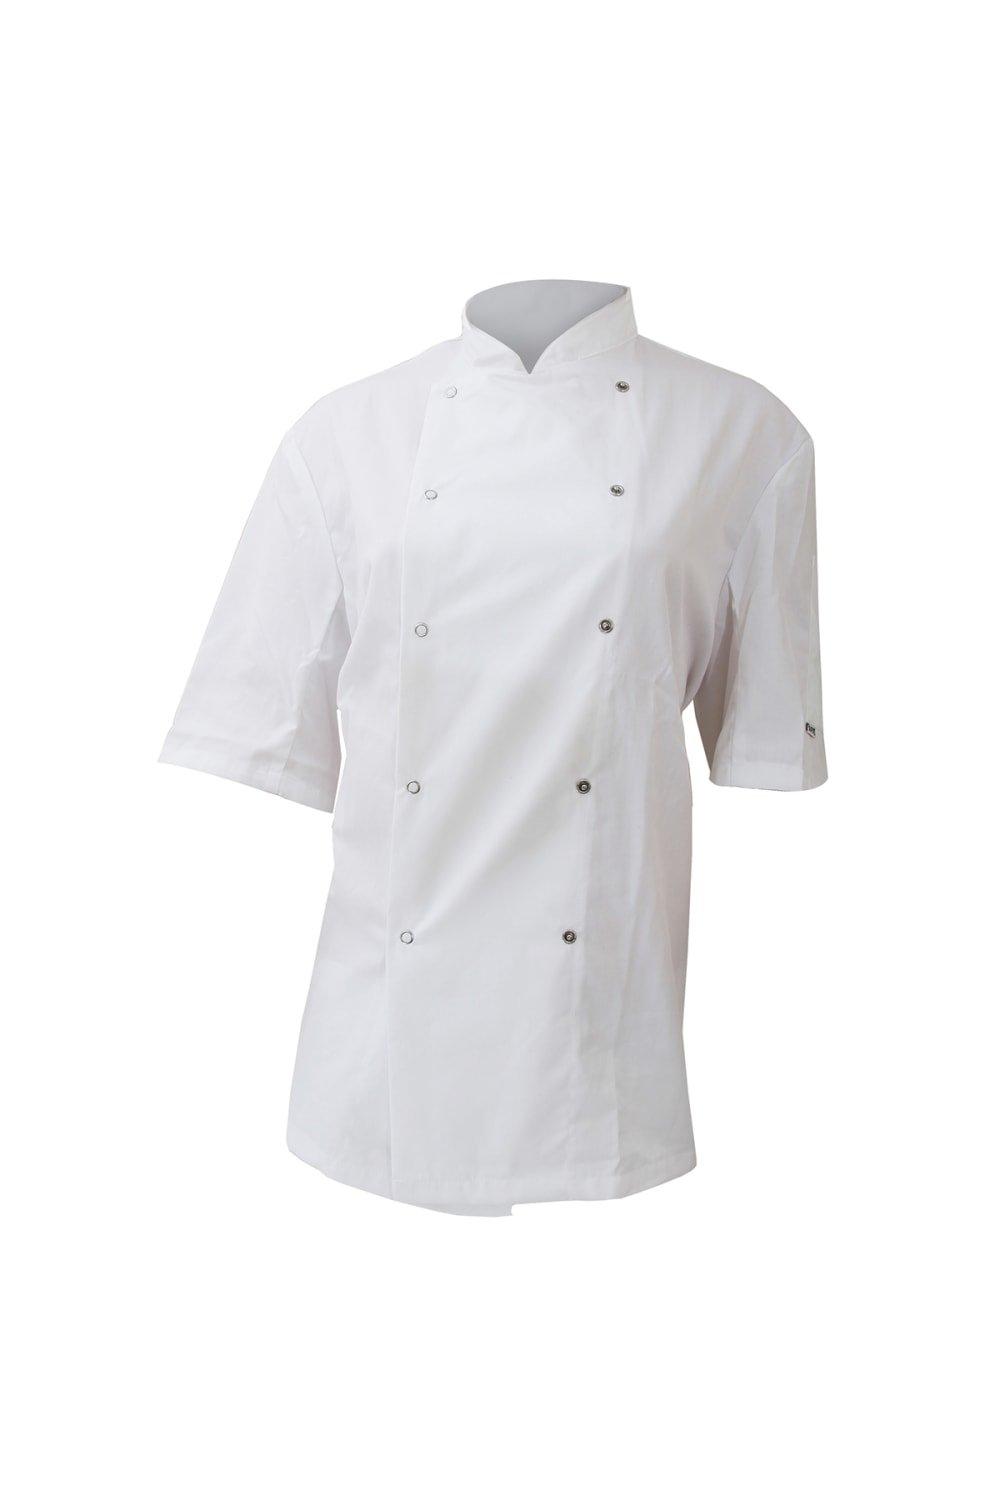 AFD Chefs Jacket Chefswear Pack of 2